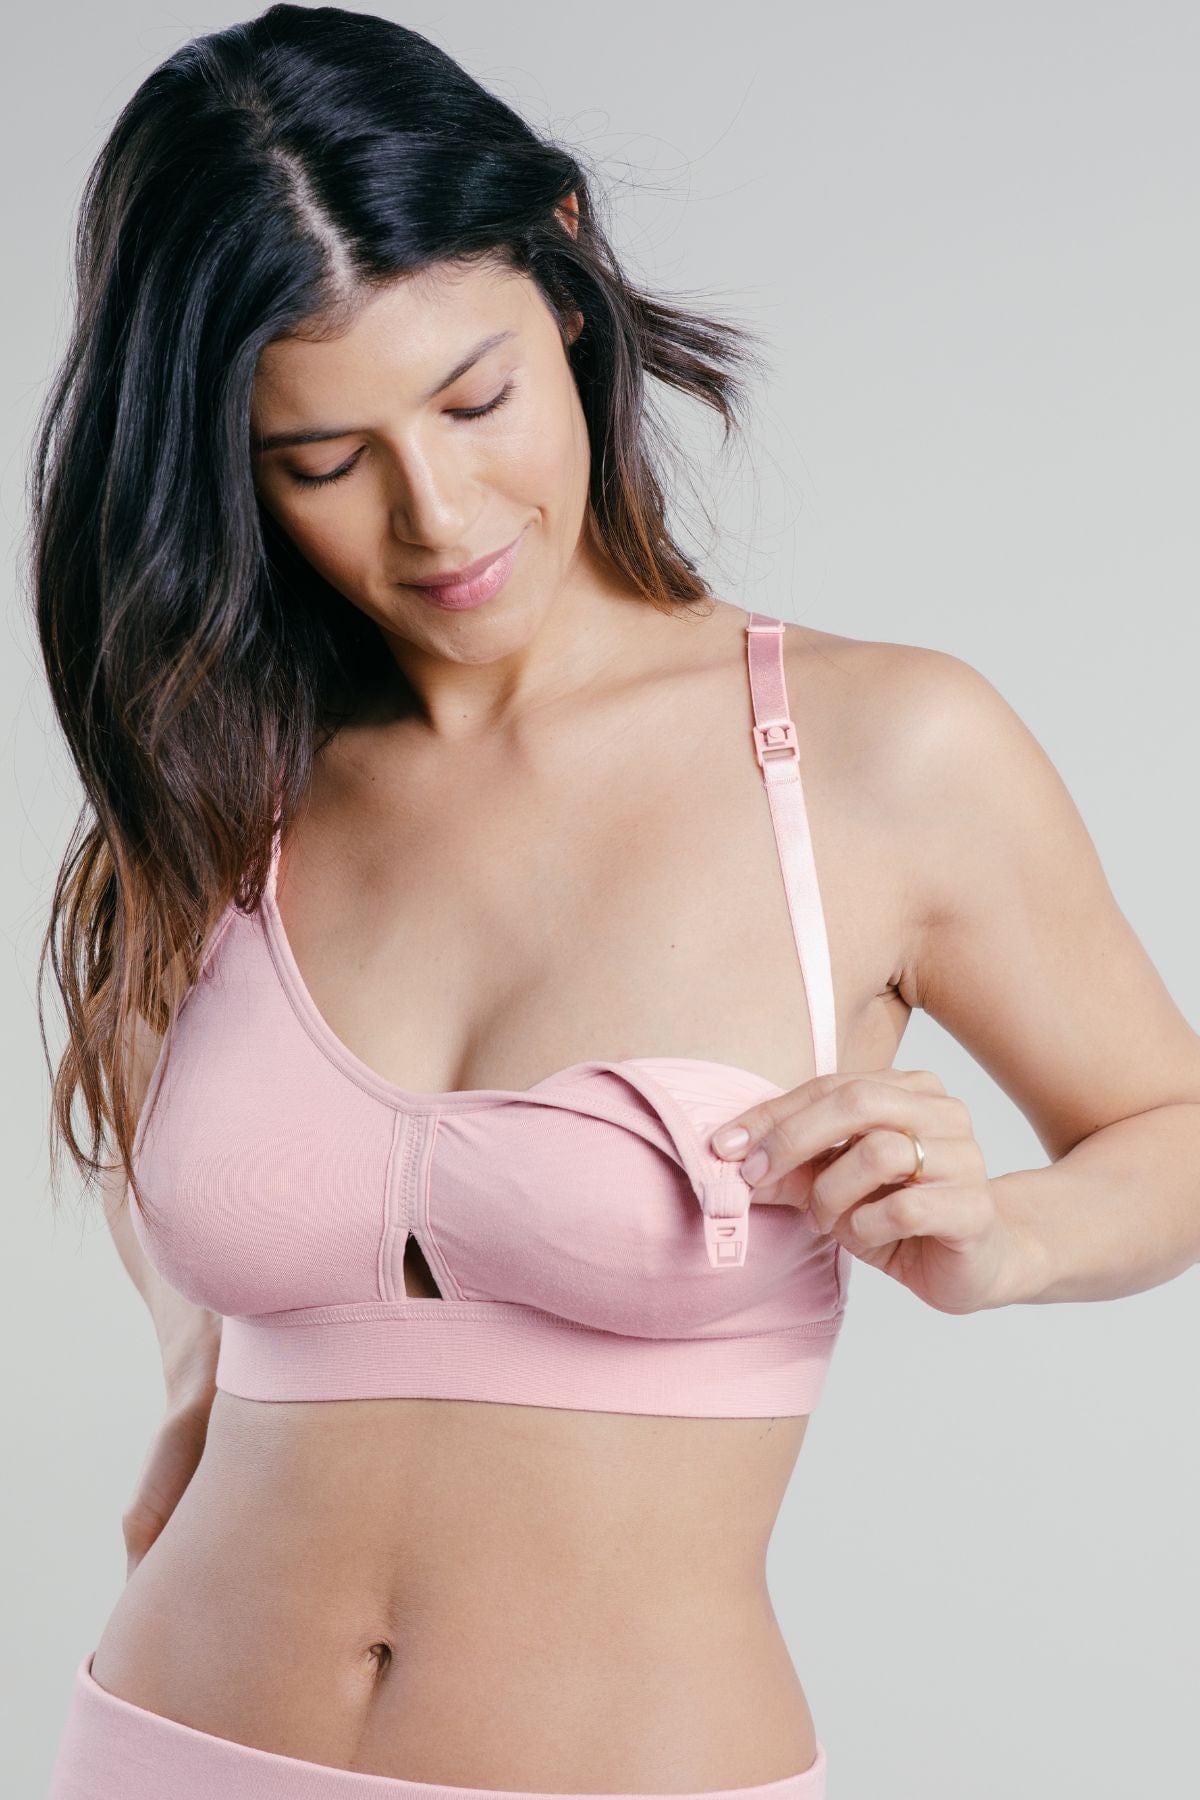 Buy Simple Wishes Hands Free Nursing & Pumping Bra, 36D, Supermom (by  Moms for Moms), Multi-Function, Padded, All Day Wear, All-in-One Maternity  Bra Styled Like a Normal Bra